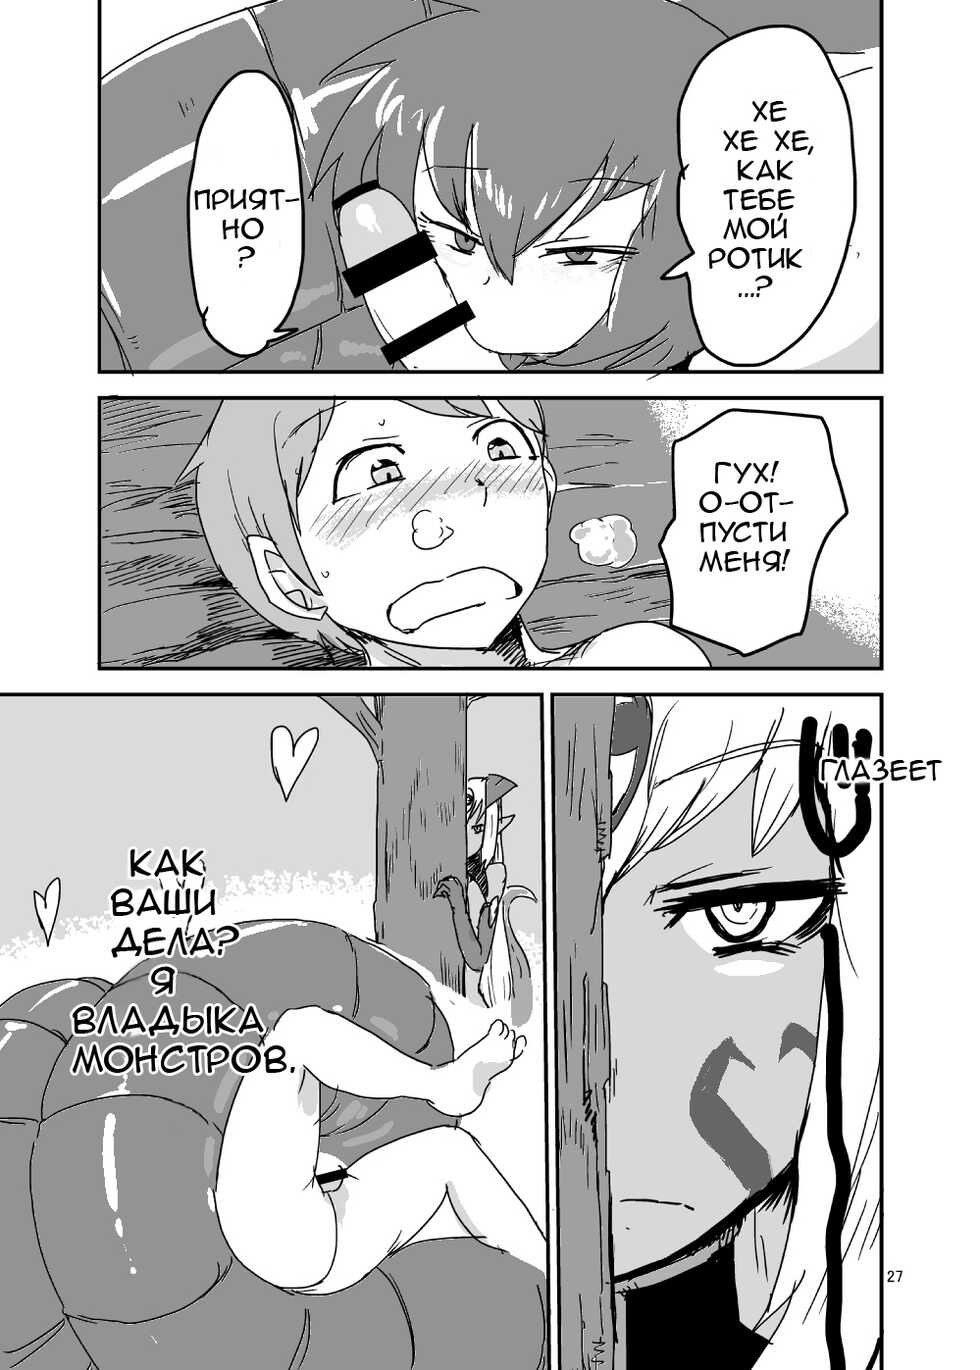 [Setouchi Pharm (Setouchi)] Mon Musu Quest! Beyond The End 2 (Monster Girl Quest!) [Russian] [﻿stycler94] [Digital] - Page 26